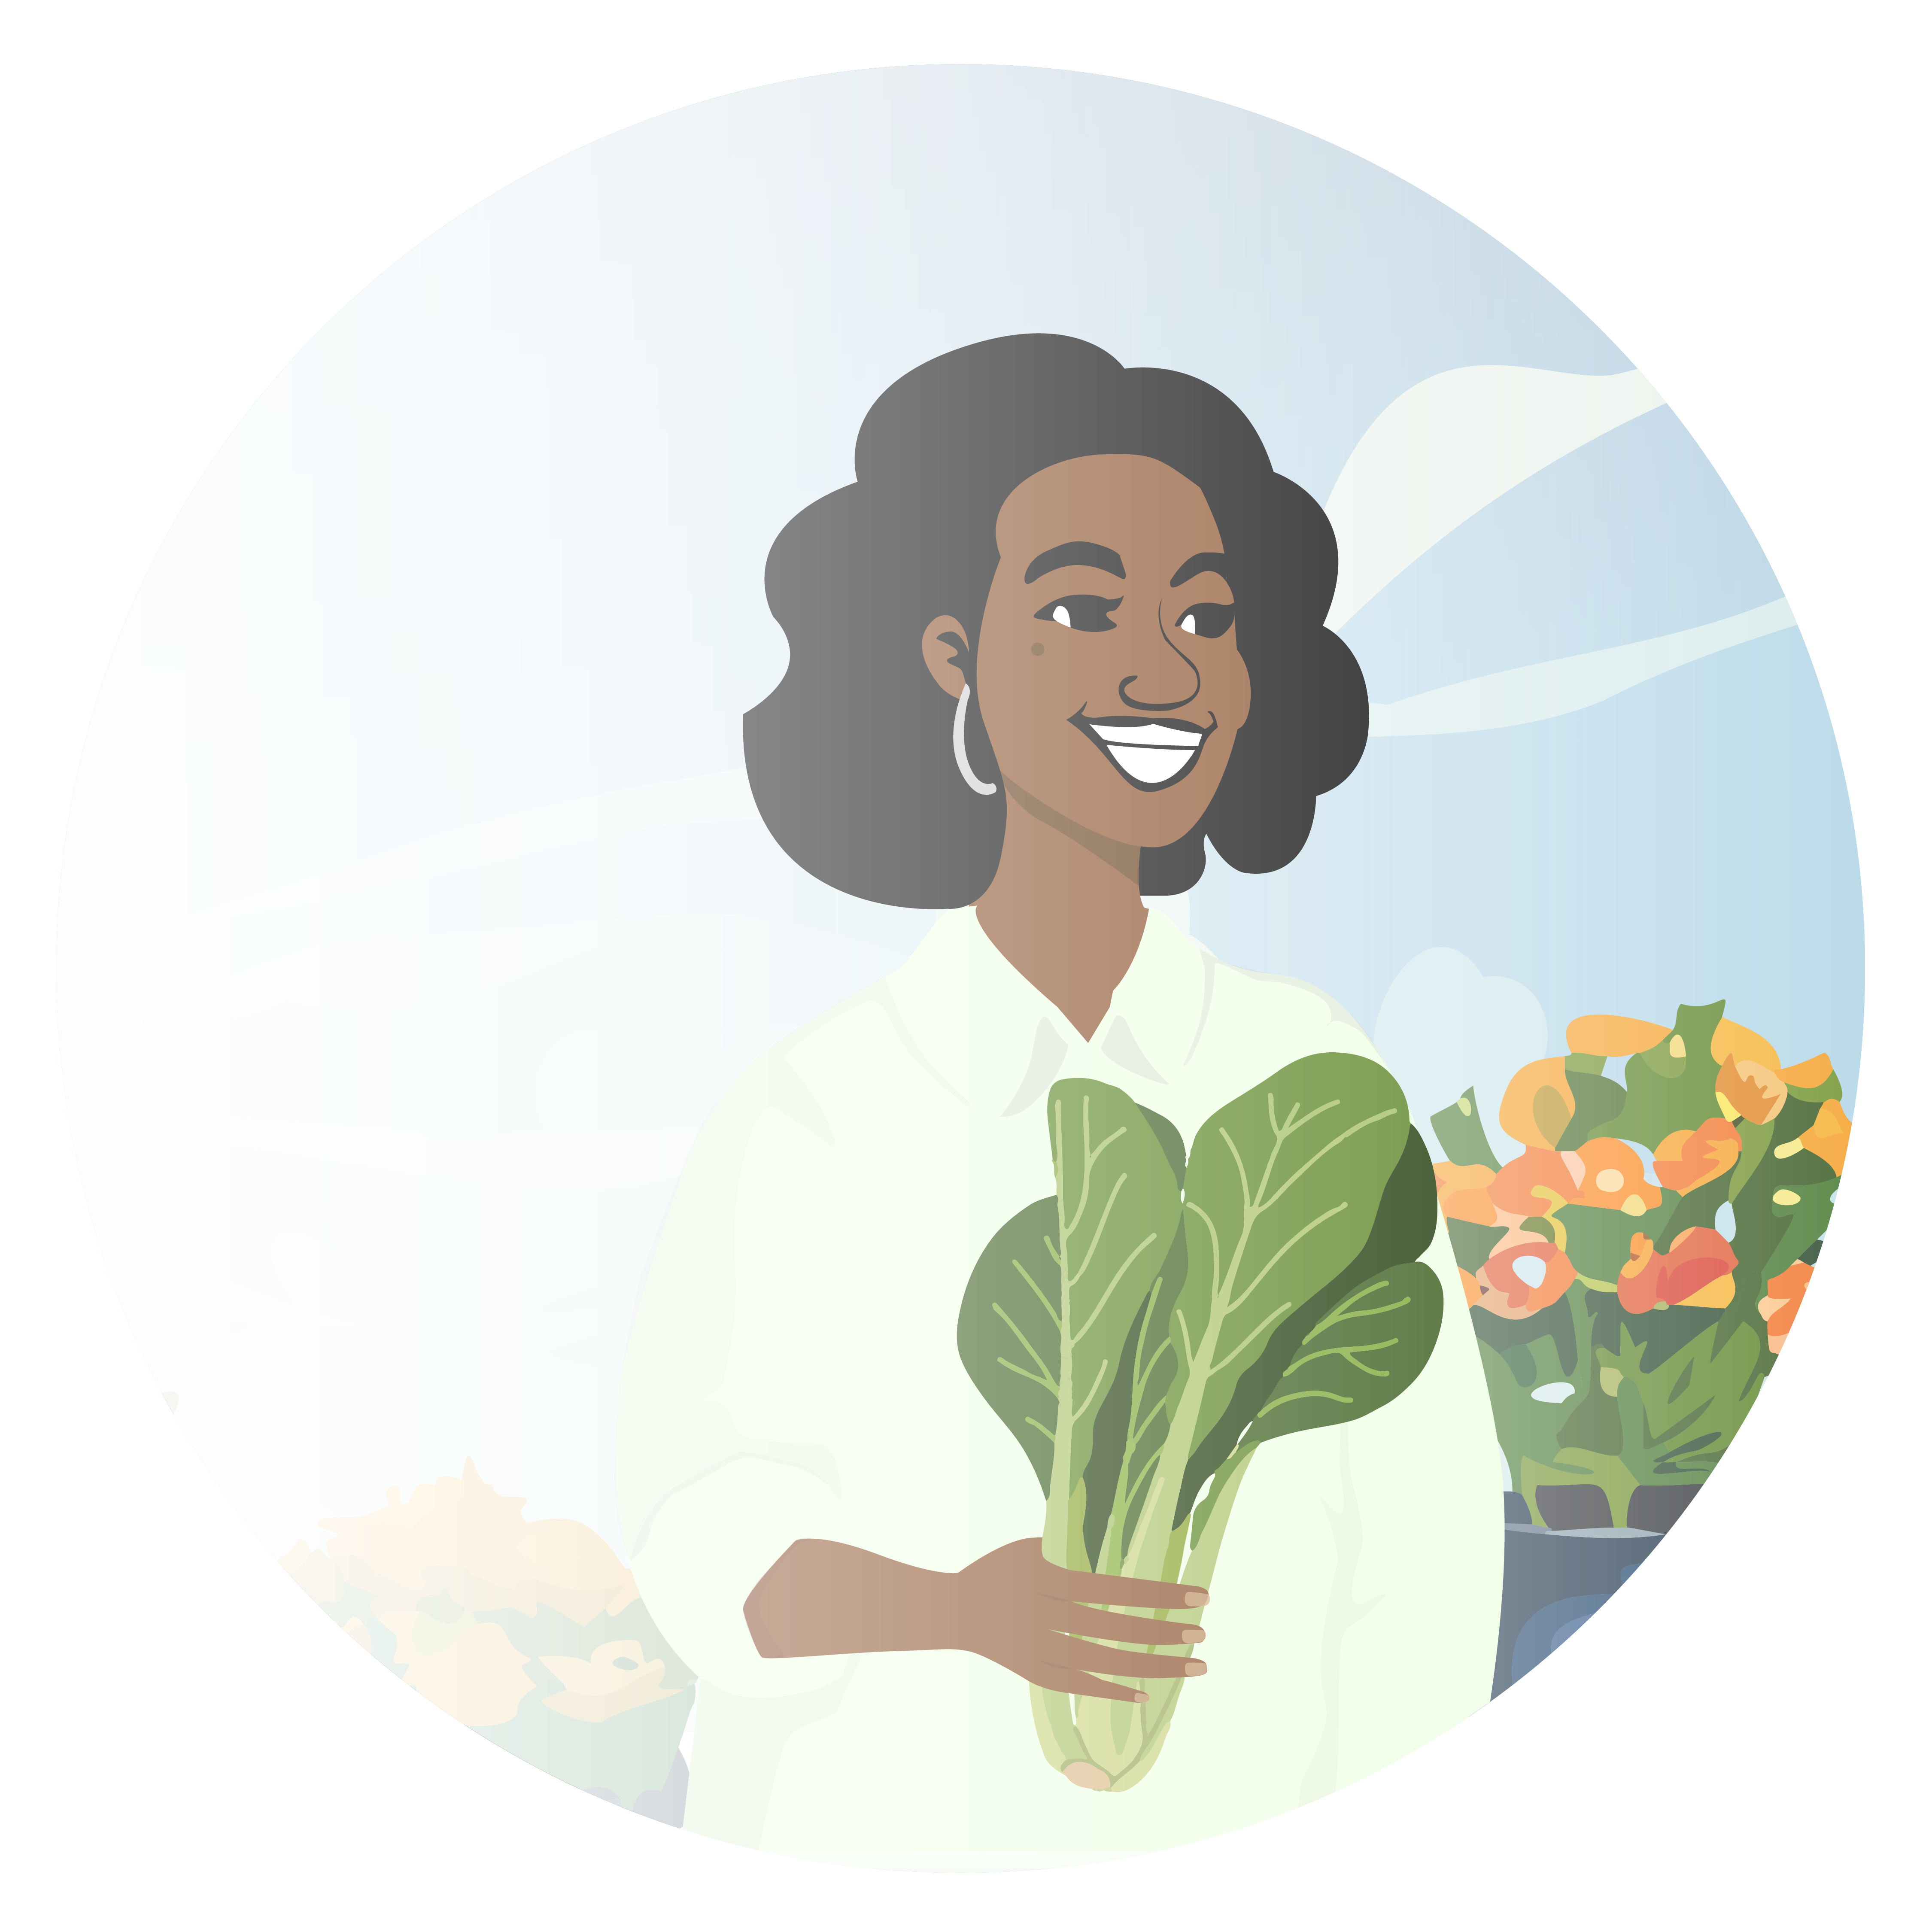 Illustration of smiling young woman holding leafy greens and flowers appear in the background from her garden